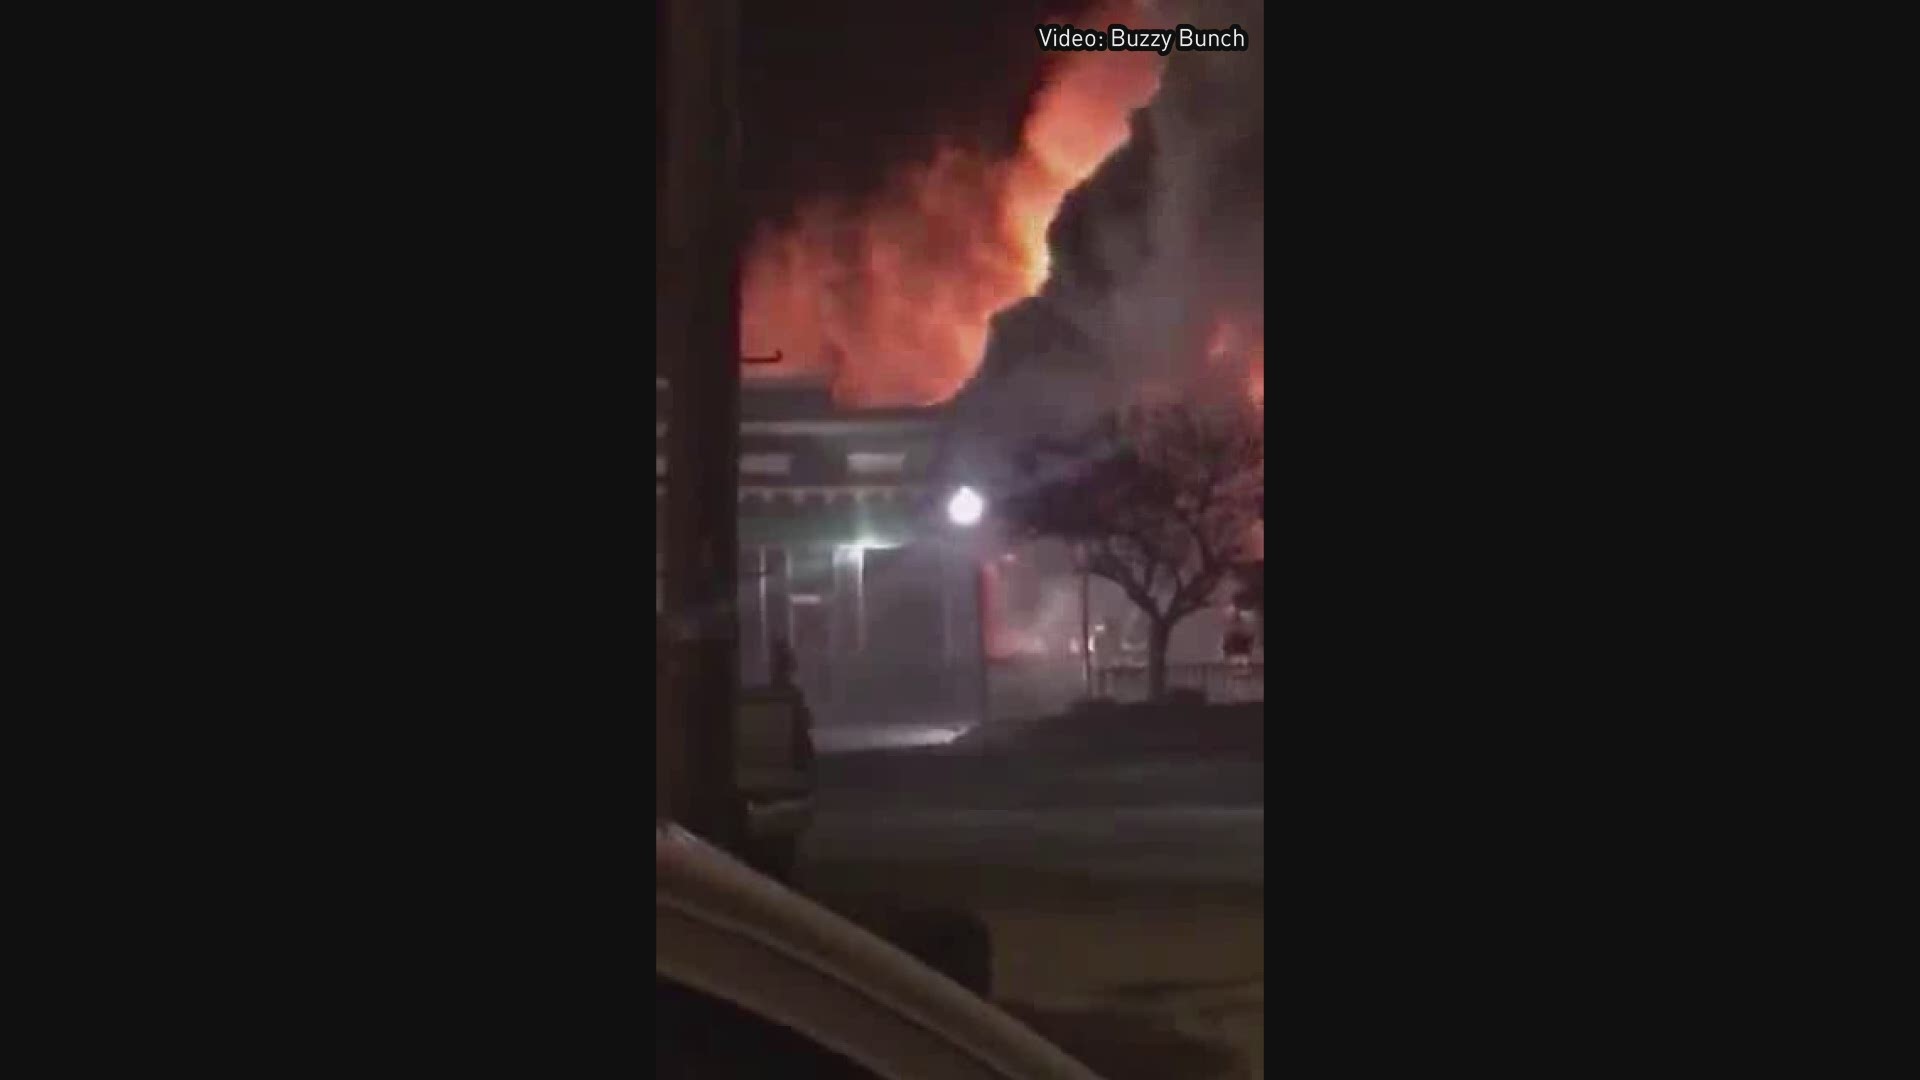 Thanks to Buzzy Bunch for sharing this video of the fire in Bamberg that caused four building to collapse.